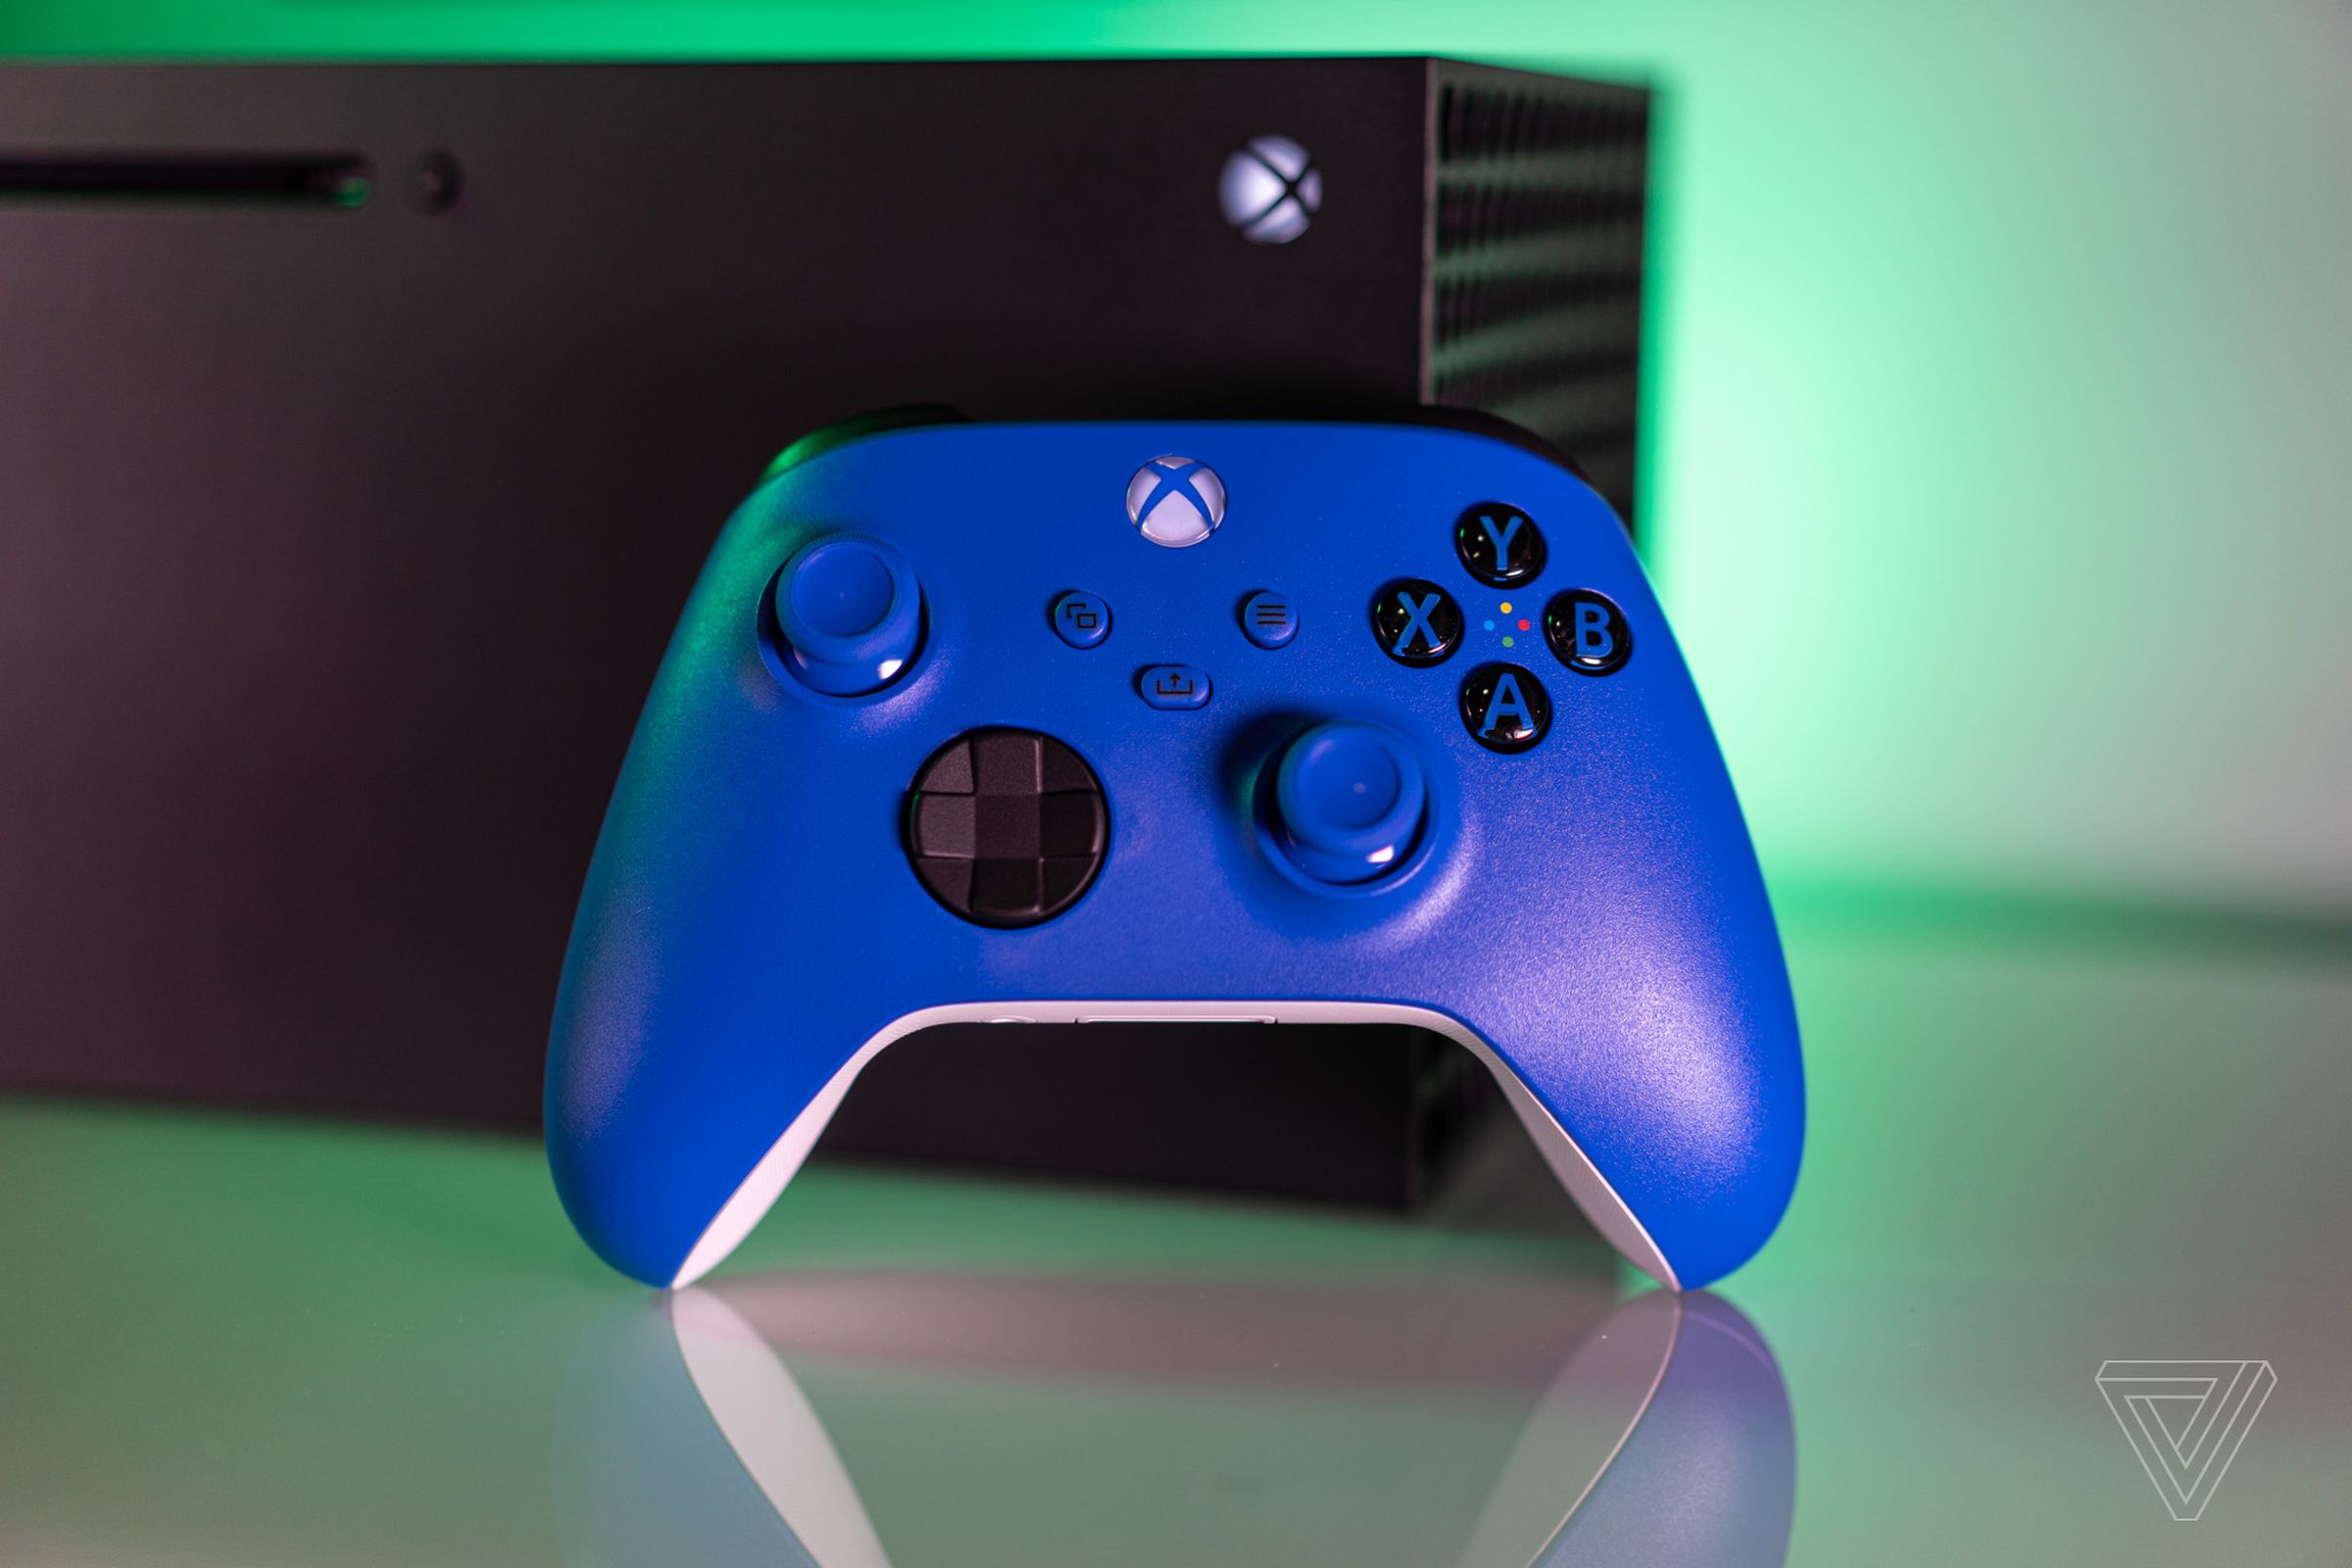 Several colors of the standard Xbox wireless controller are discounted to $39.99